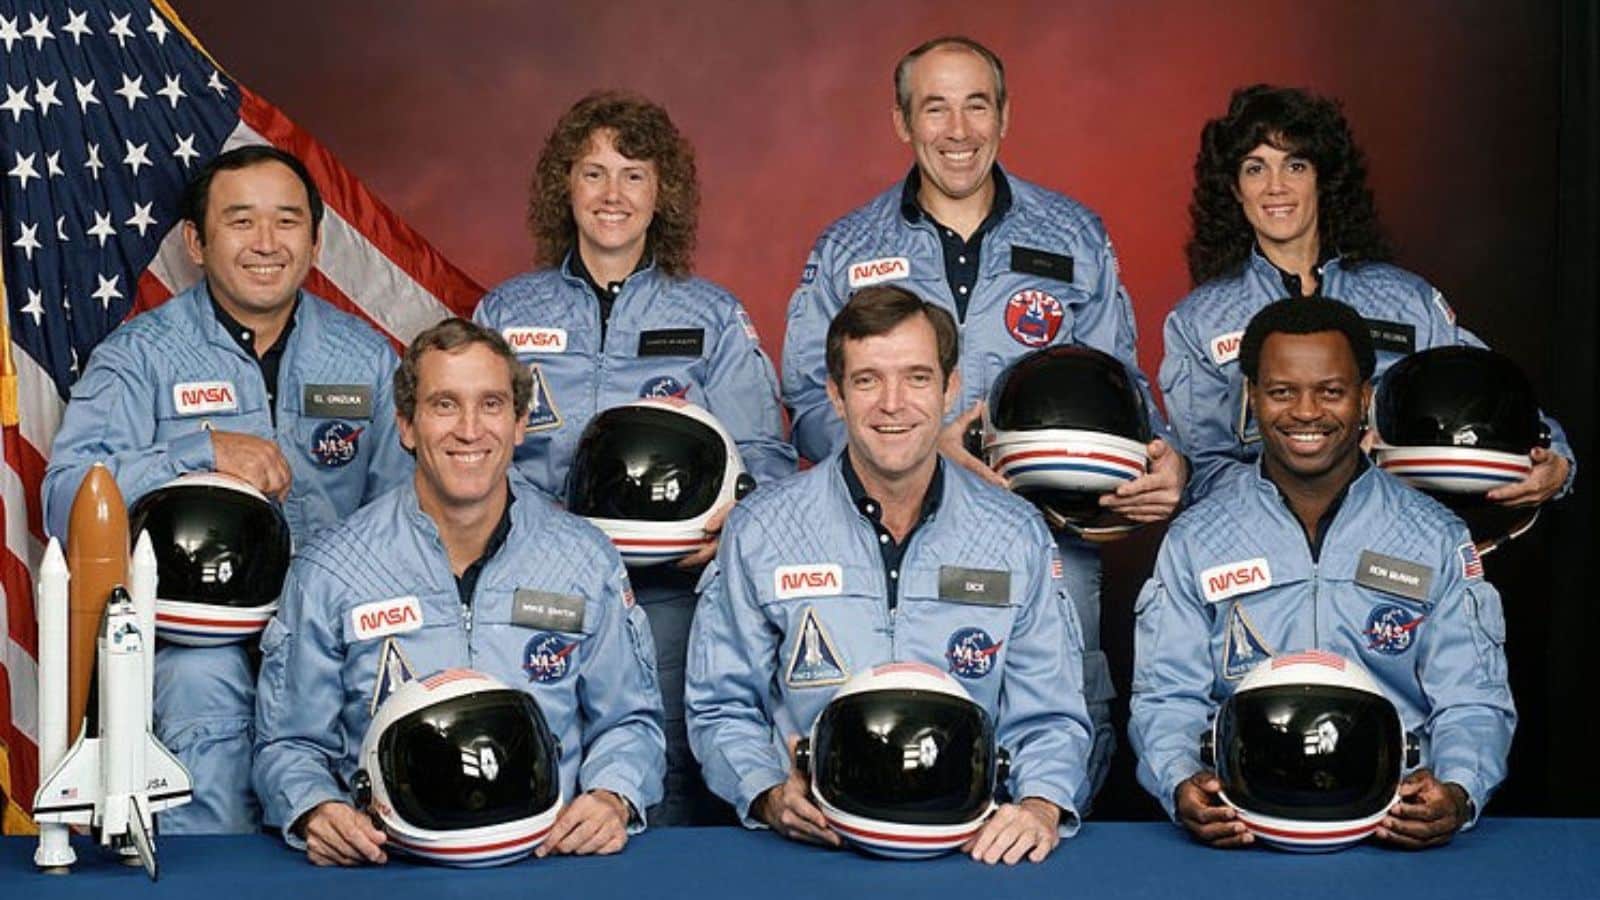 The Challenger Space Shuttle Crew